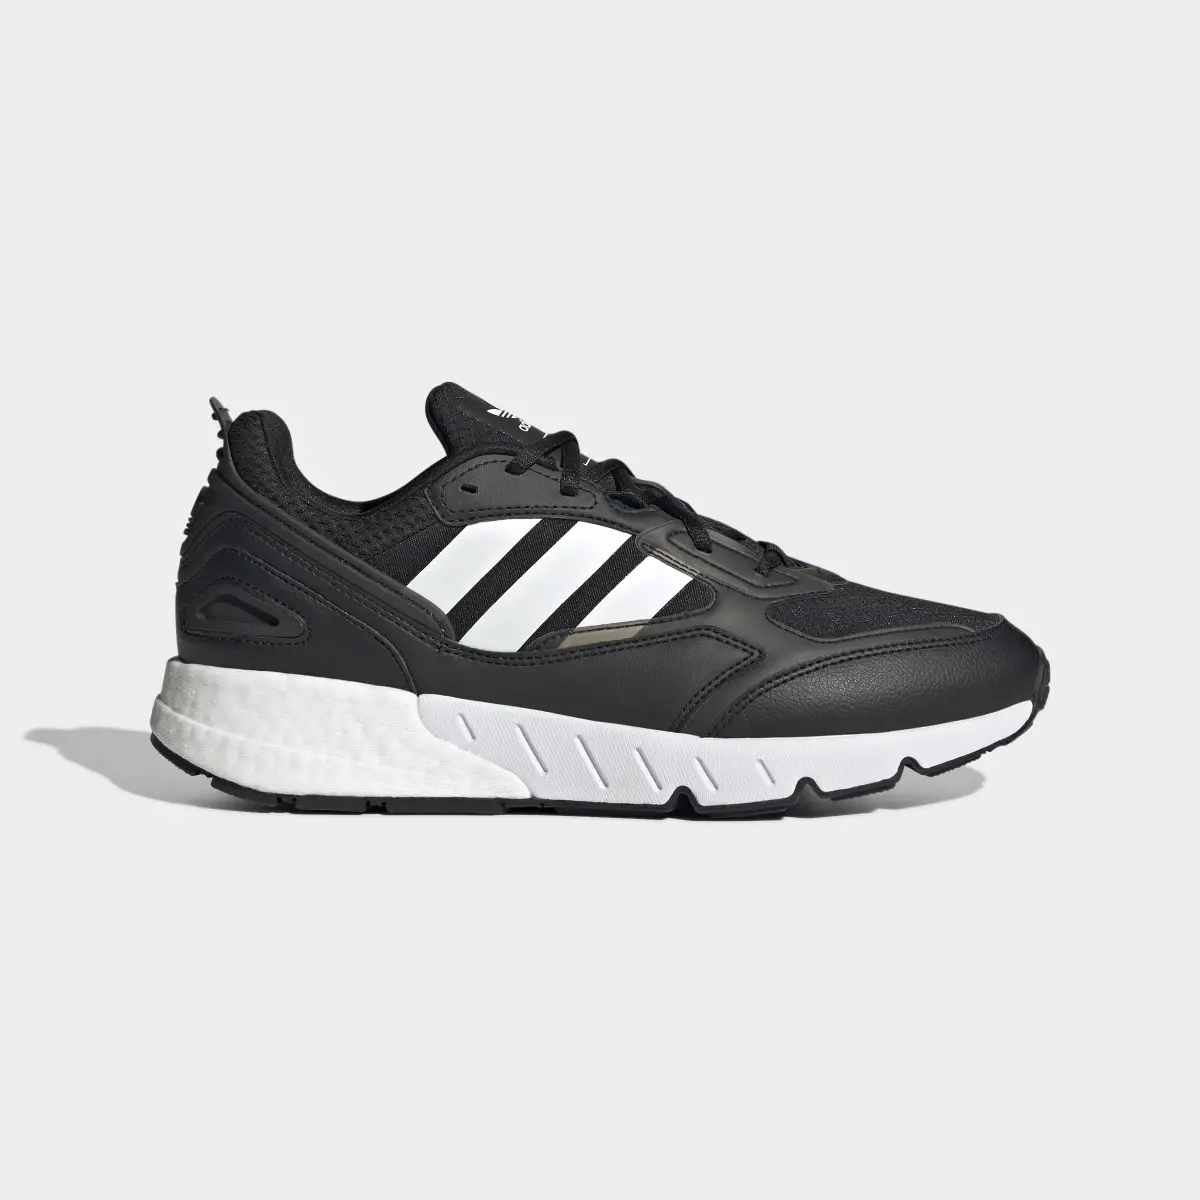 Adidas ZX 1K Boost 2.0 Shoes. 2